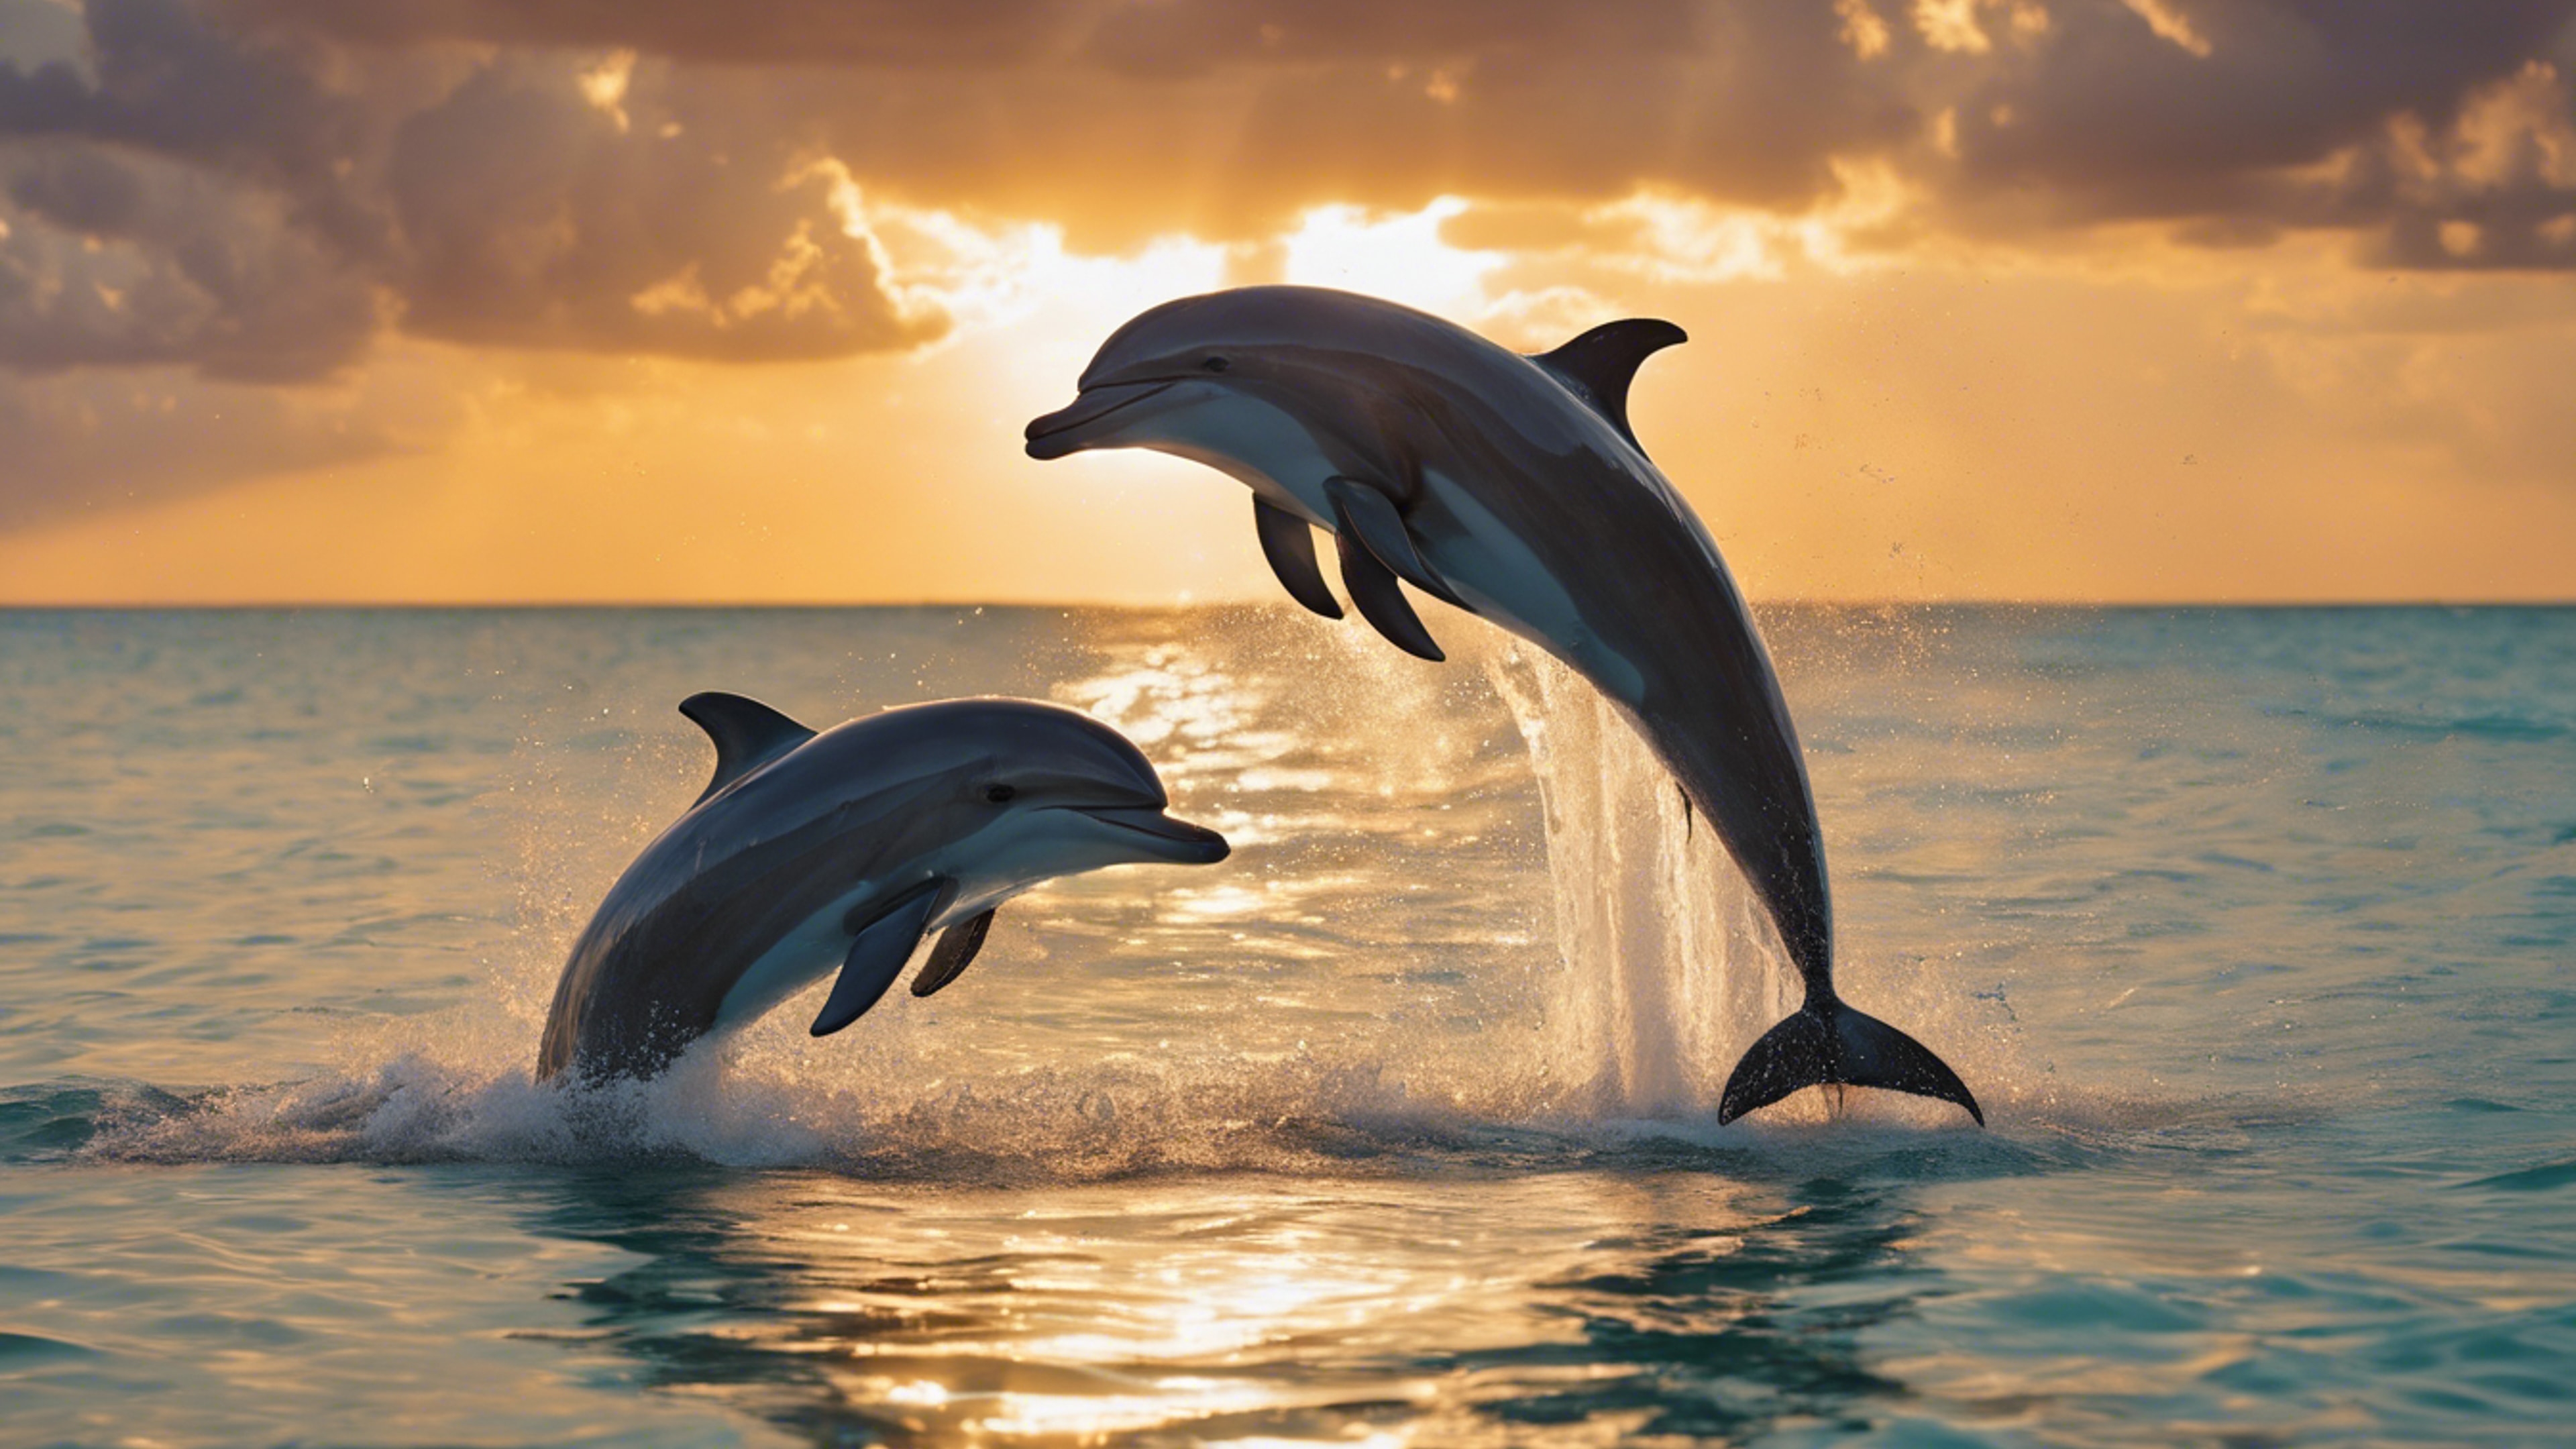 Two playful, energetic dolphins leaping out of the clear waters of Key West during a beautiful golden sunset.壁紙[8775b9f69e3e41789997]